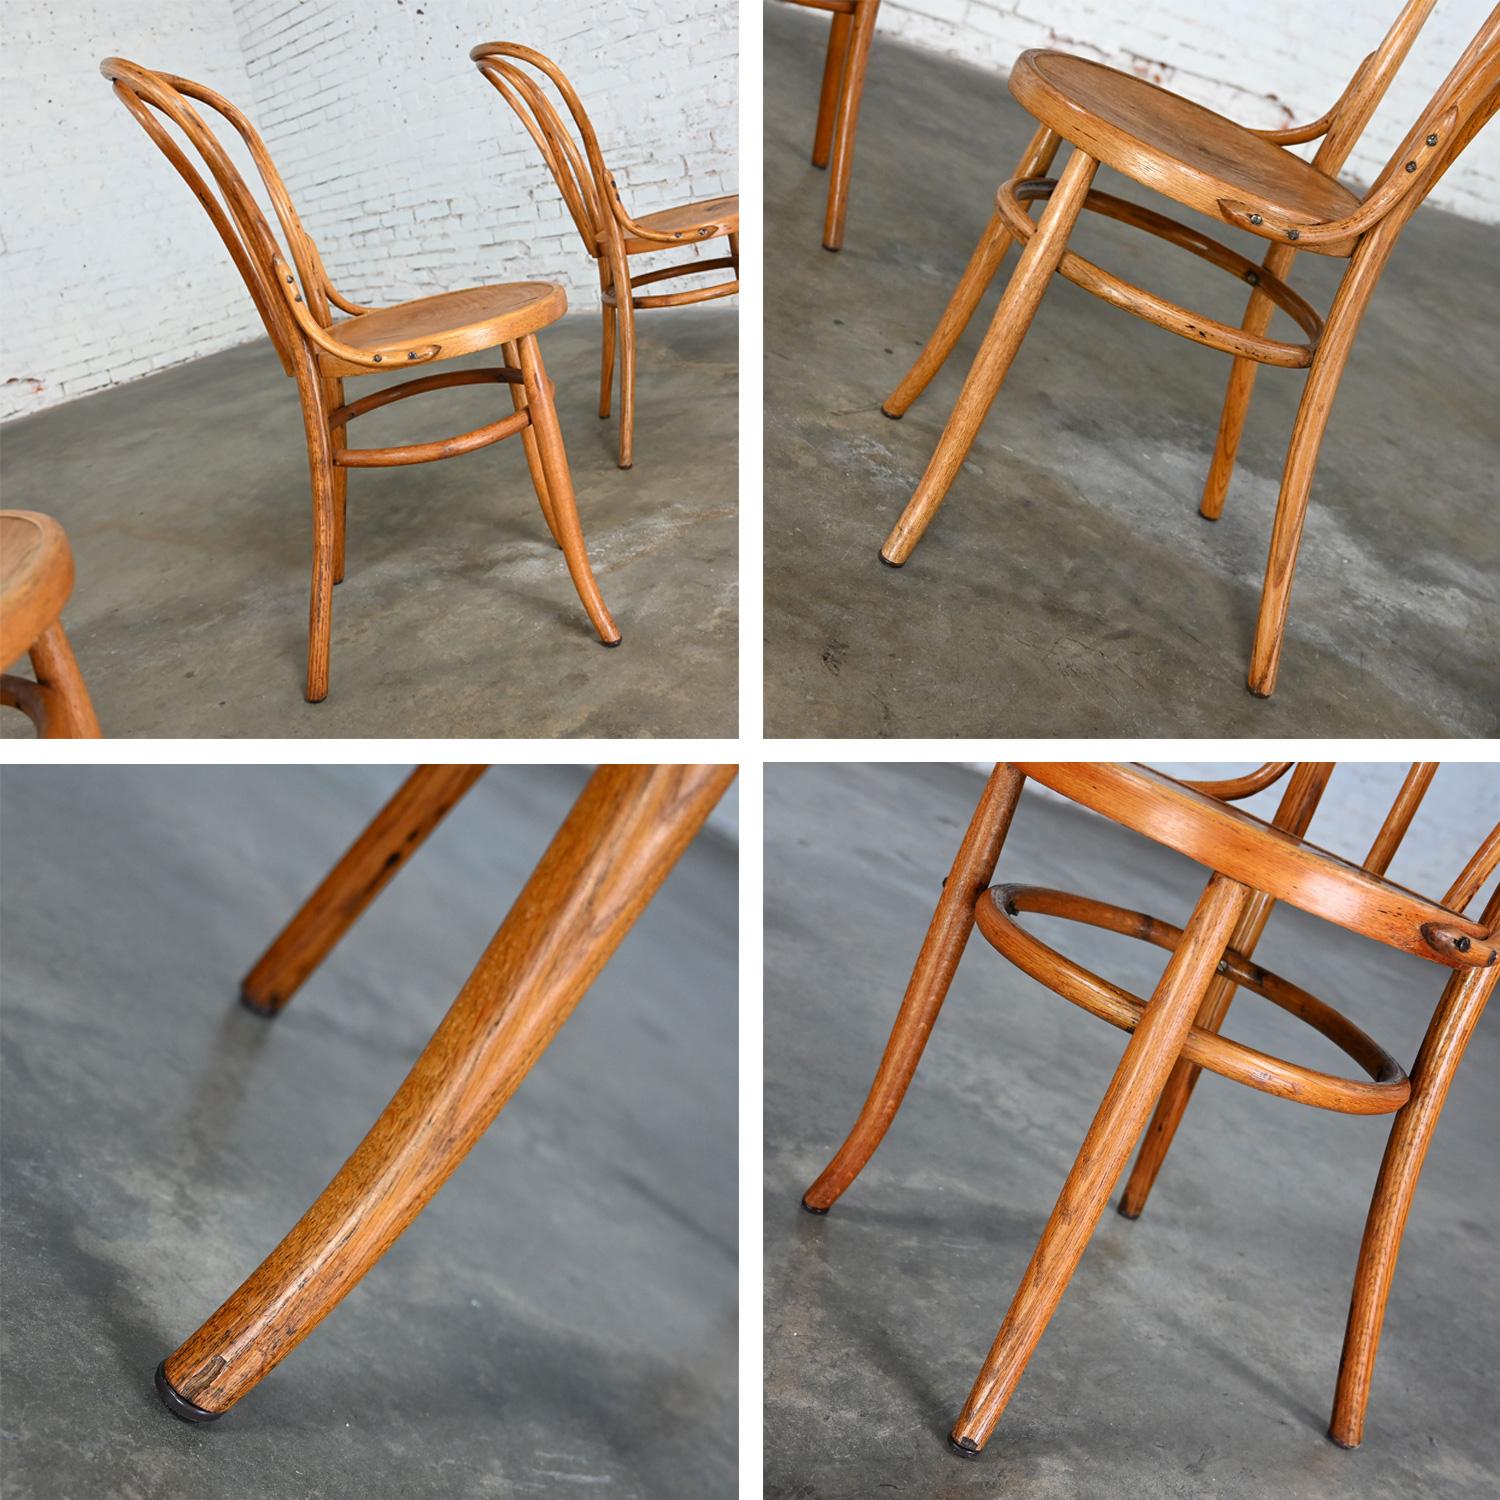 Bauhaus Oak Bentwood Chairs Attributed to Thonet #18 Café Chair Set of 6 For Sale 5